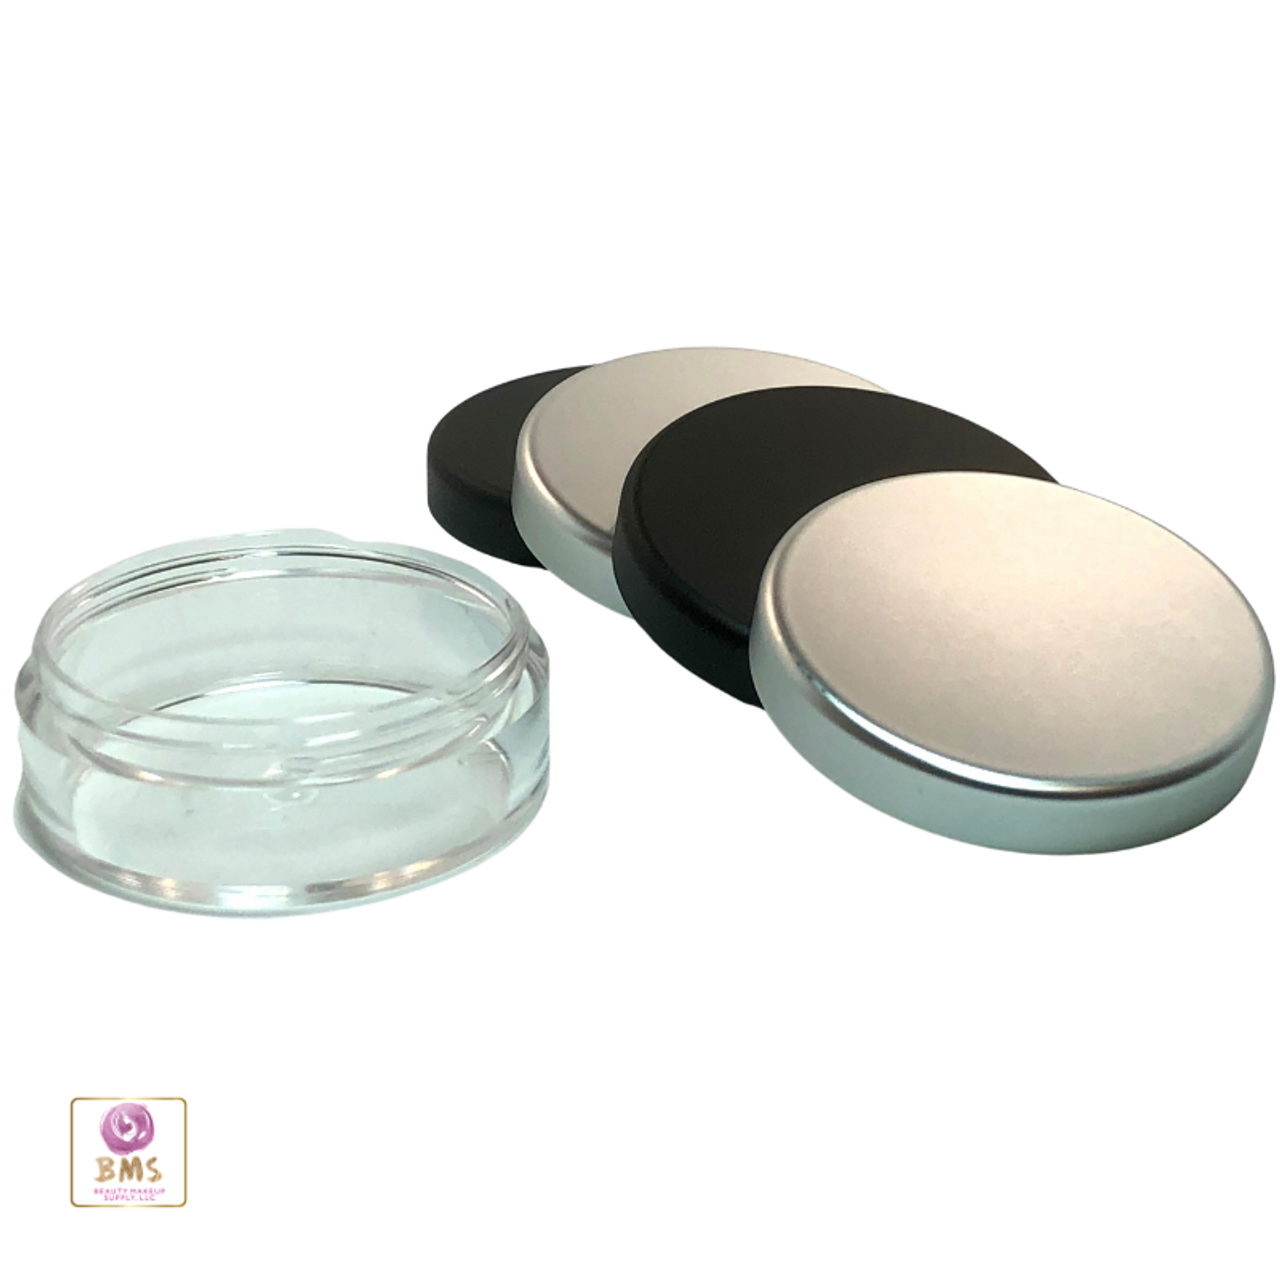 https://cdn11.bigcommerce.com/s-qd7k5gxi/images/stencil/1280x1280/products/436/5829/plastic_cosmetic_jars_3072_3025_family_beauty_makeup_supply__45652.1659579717.png?c=2